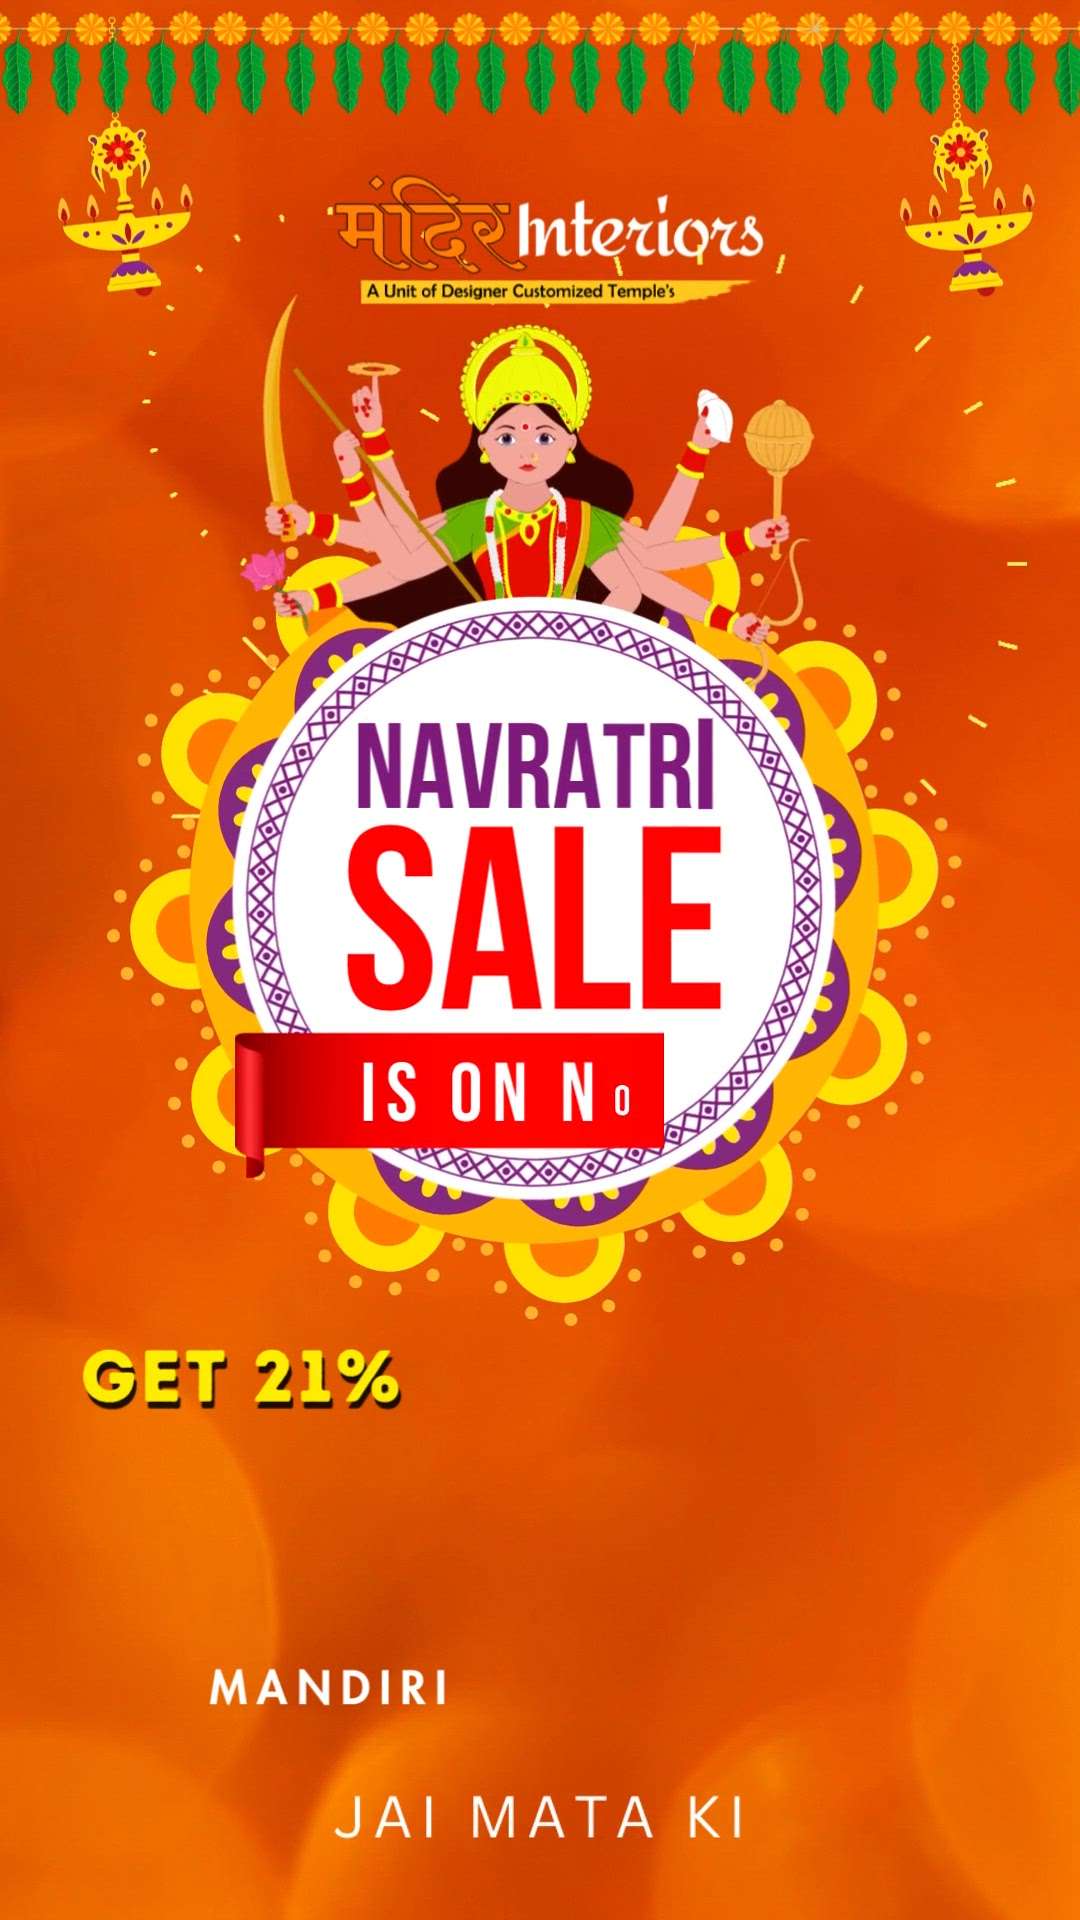 Navratri Sale is ON now! Get 21% OFF on all Temple Designs, Pooja Rooms at Mandir Interiors. Bring a Beautiful Customised Mandir to your Home, Office, Shop exclusively manufactured by Mandir Interiors. 

Happy Navratri 🚩🙏 

#navratri #navratri2023 #navratiwishes #navratrivibes #happynavratri2023 #happynavratri #madurga #jaimatadi2023 #jaimatadi #mandirdesign #templedesign #furnituremanufacturer #navratrisale #featival #sale